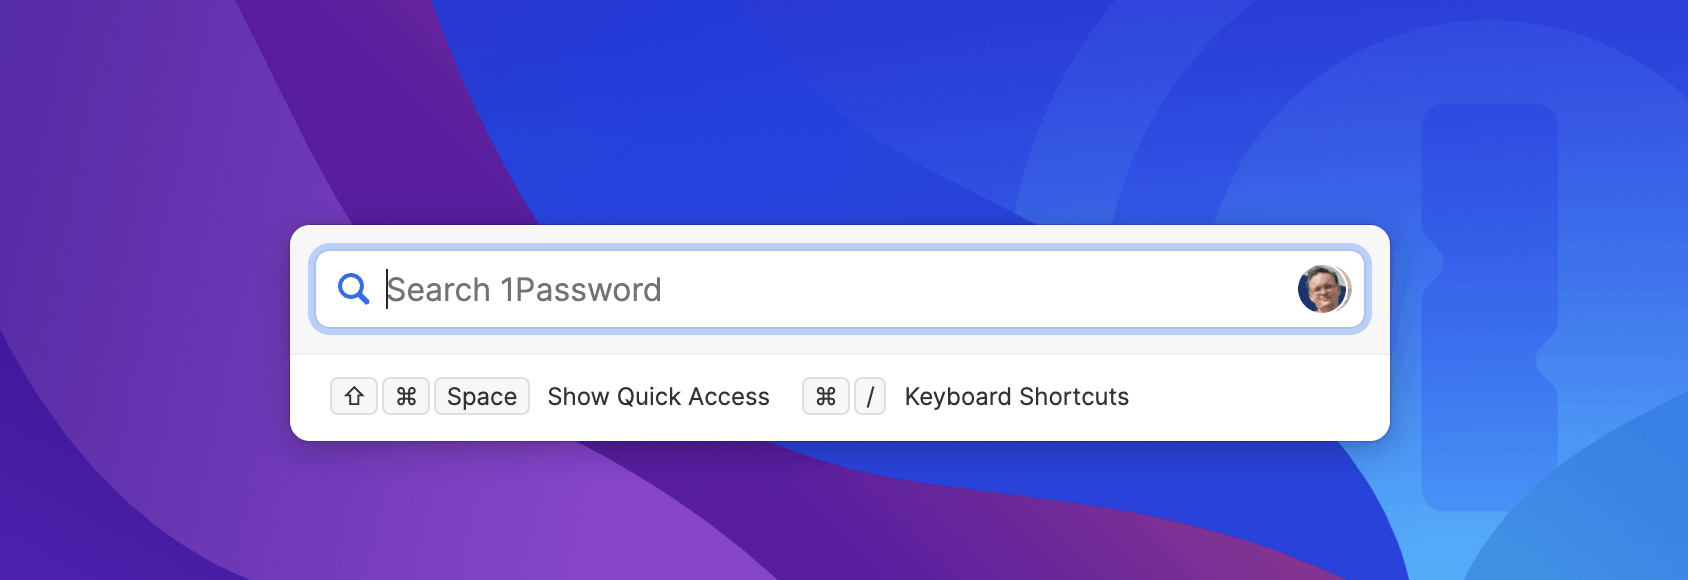 1Password Quick Access window with a custom collection selected using the new keyboard shortcuts